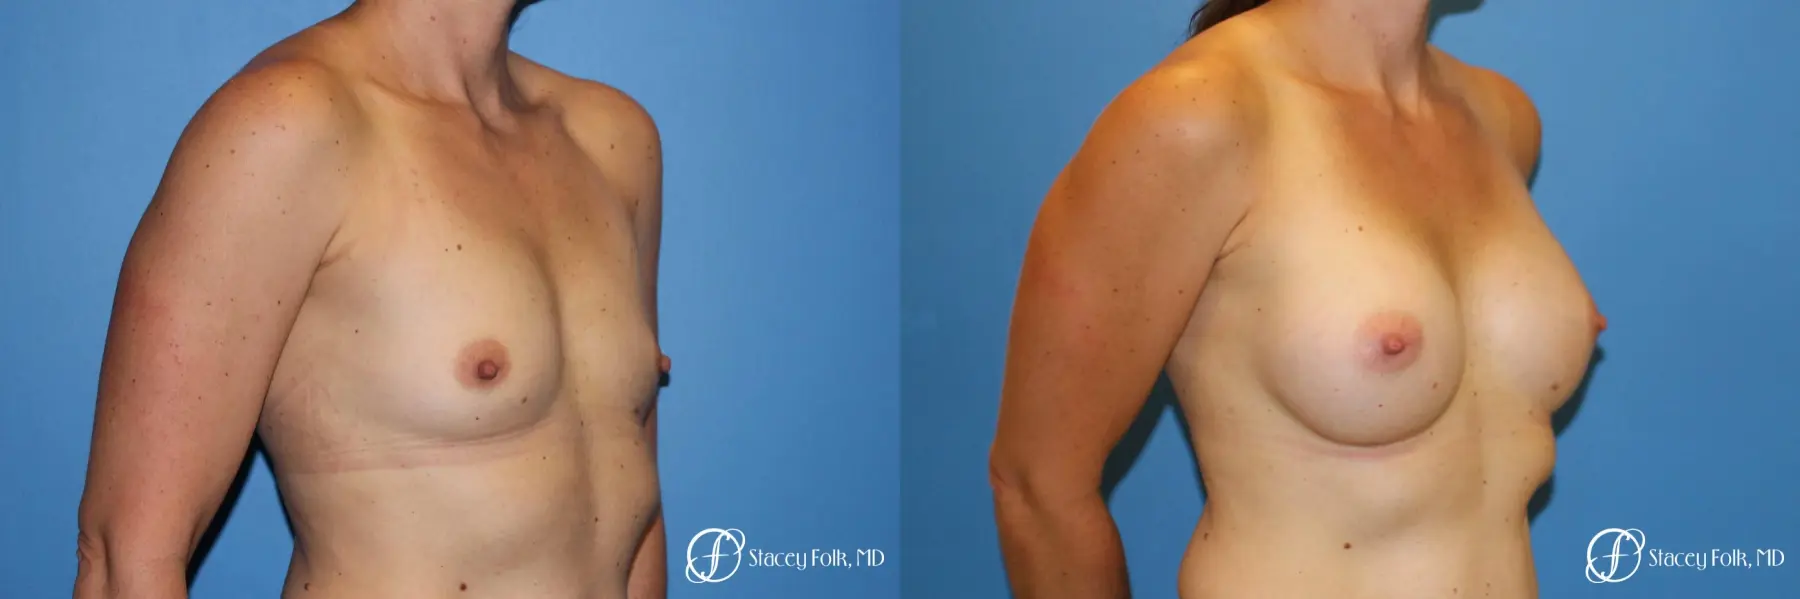 Denver Breast Augmentation 6611 - Before and After 2